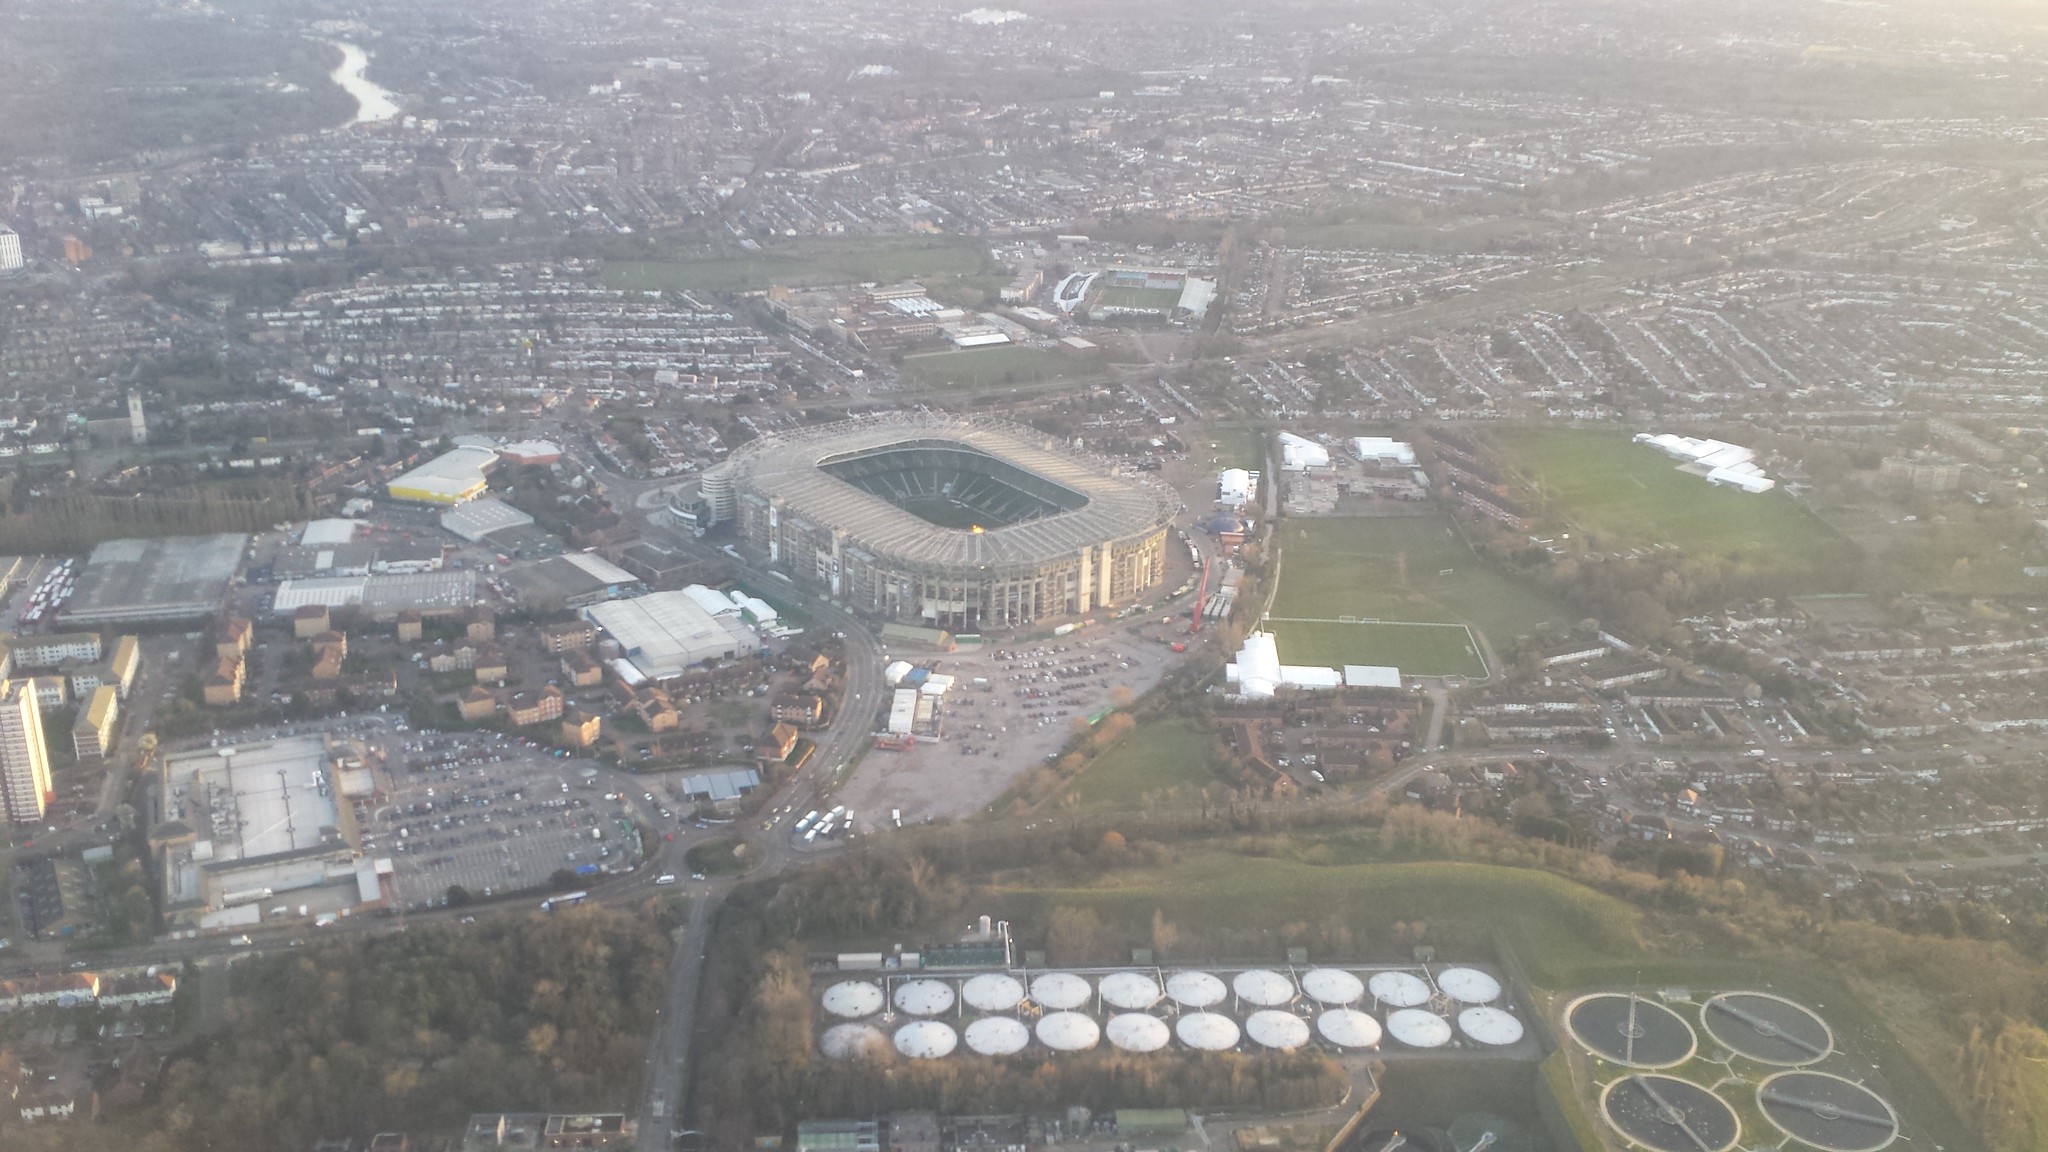 The view on final approach into Heathrow